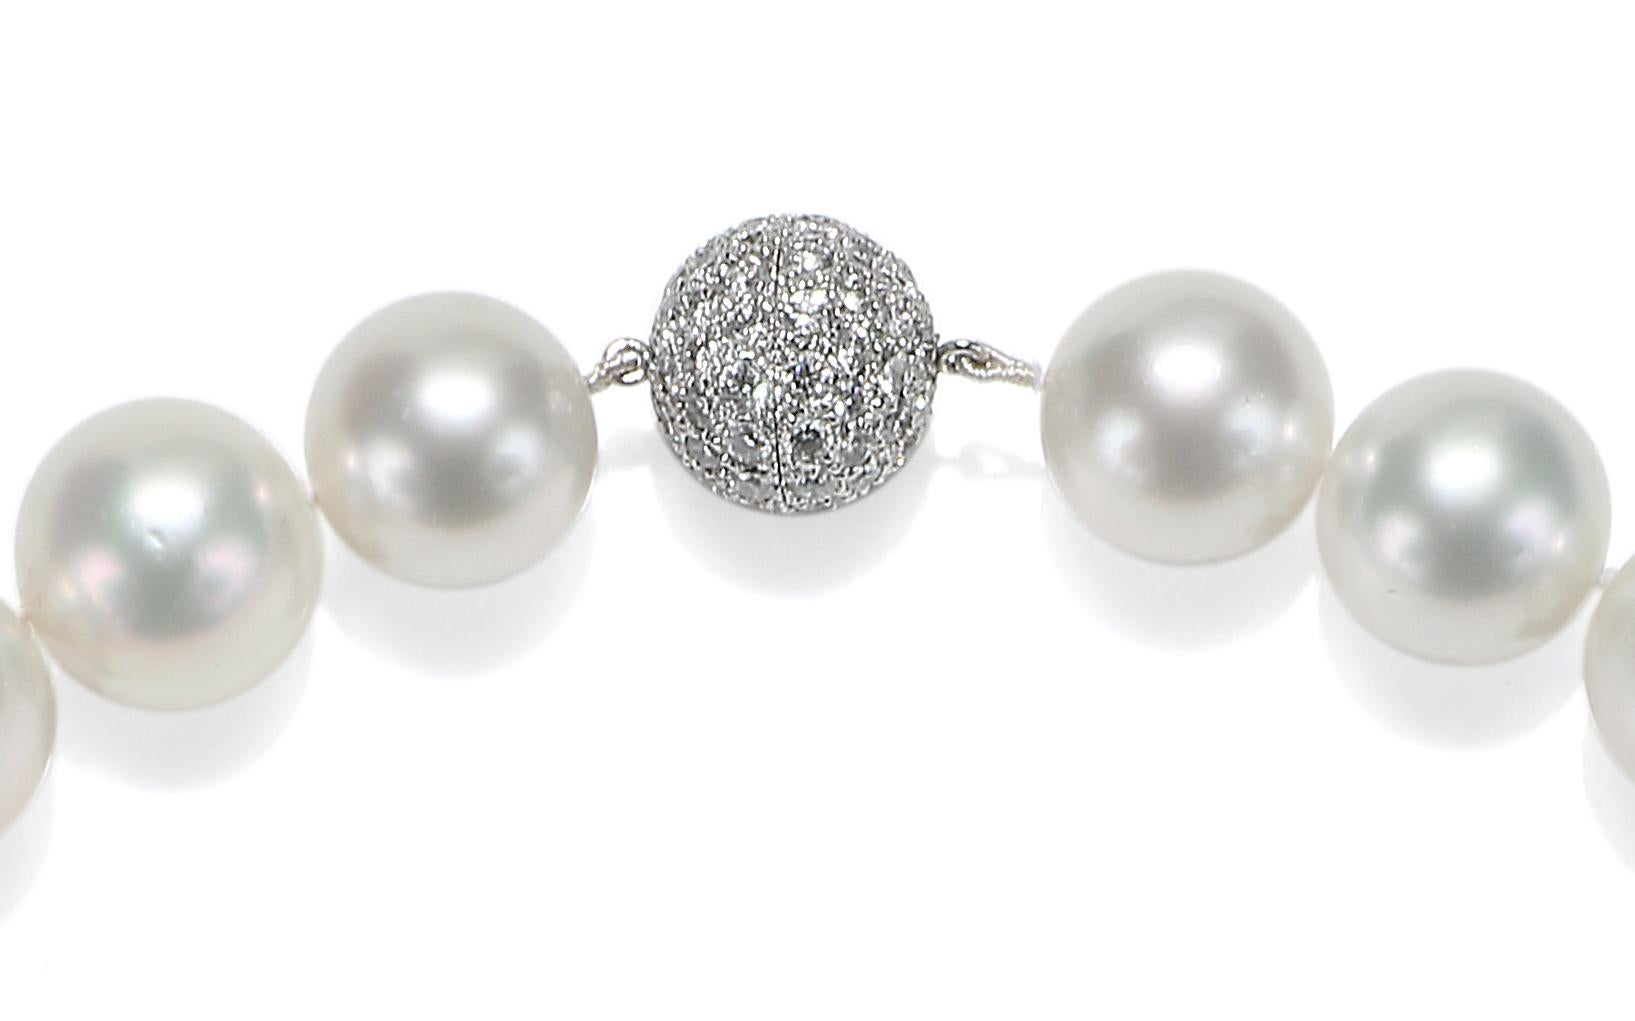 White South Sea Pearl Necklace with 18 Karat White Gold Diamond Pave ...